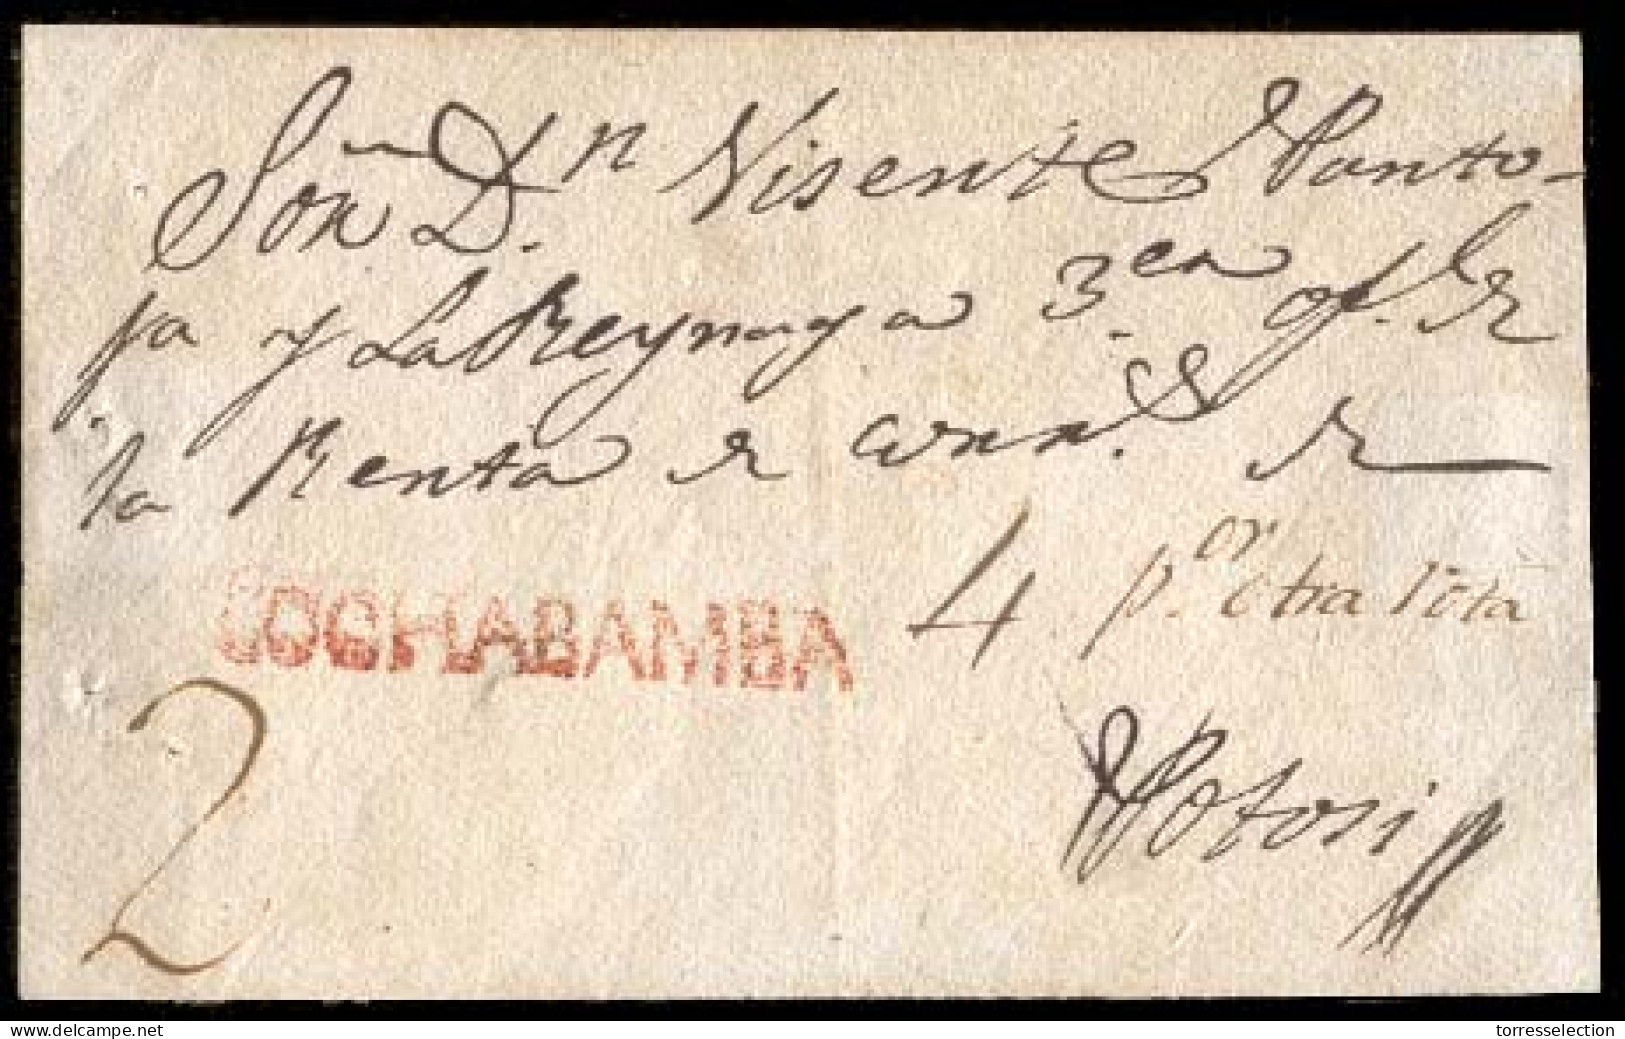 BOLIVIA. C. 1800. Colonial Front To Potosi With Red "COCHABAMBA" (xxx). Excellent Condition Strike. - Bolivie